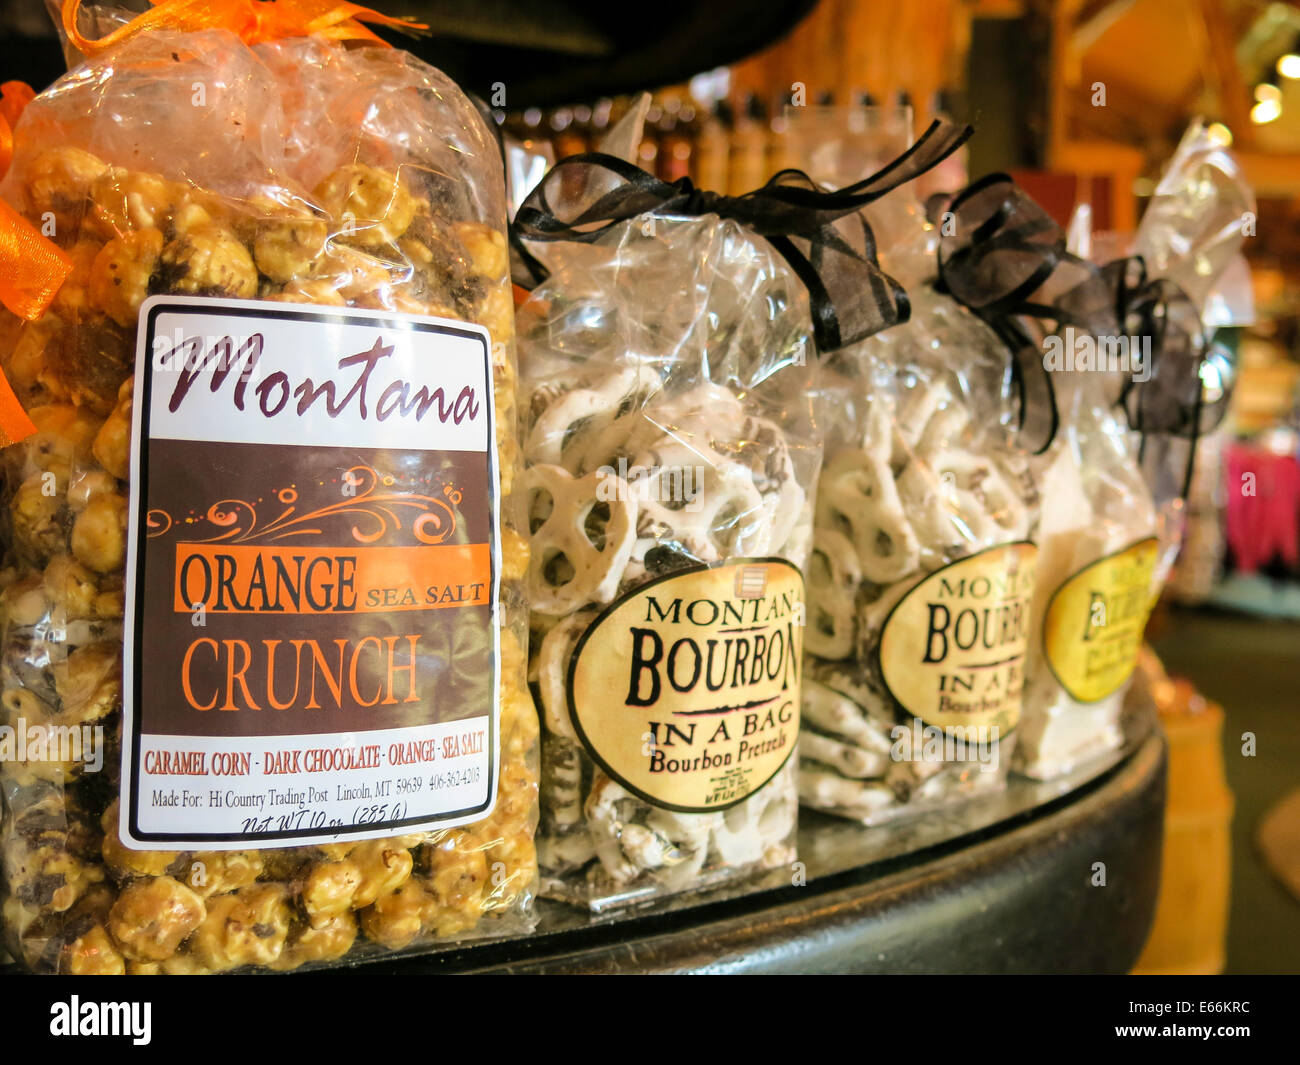 Montana Crunch Brand Carmel Corn and Snack Pretzels in Bags, Hi-Country Trading Post, Lincoln, Montana Stock Photo